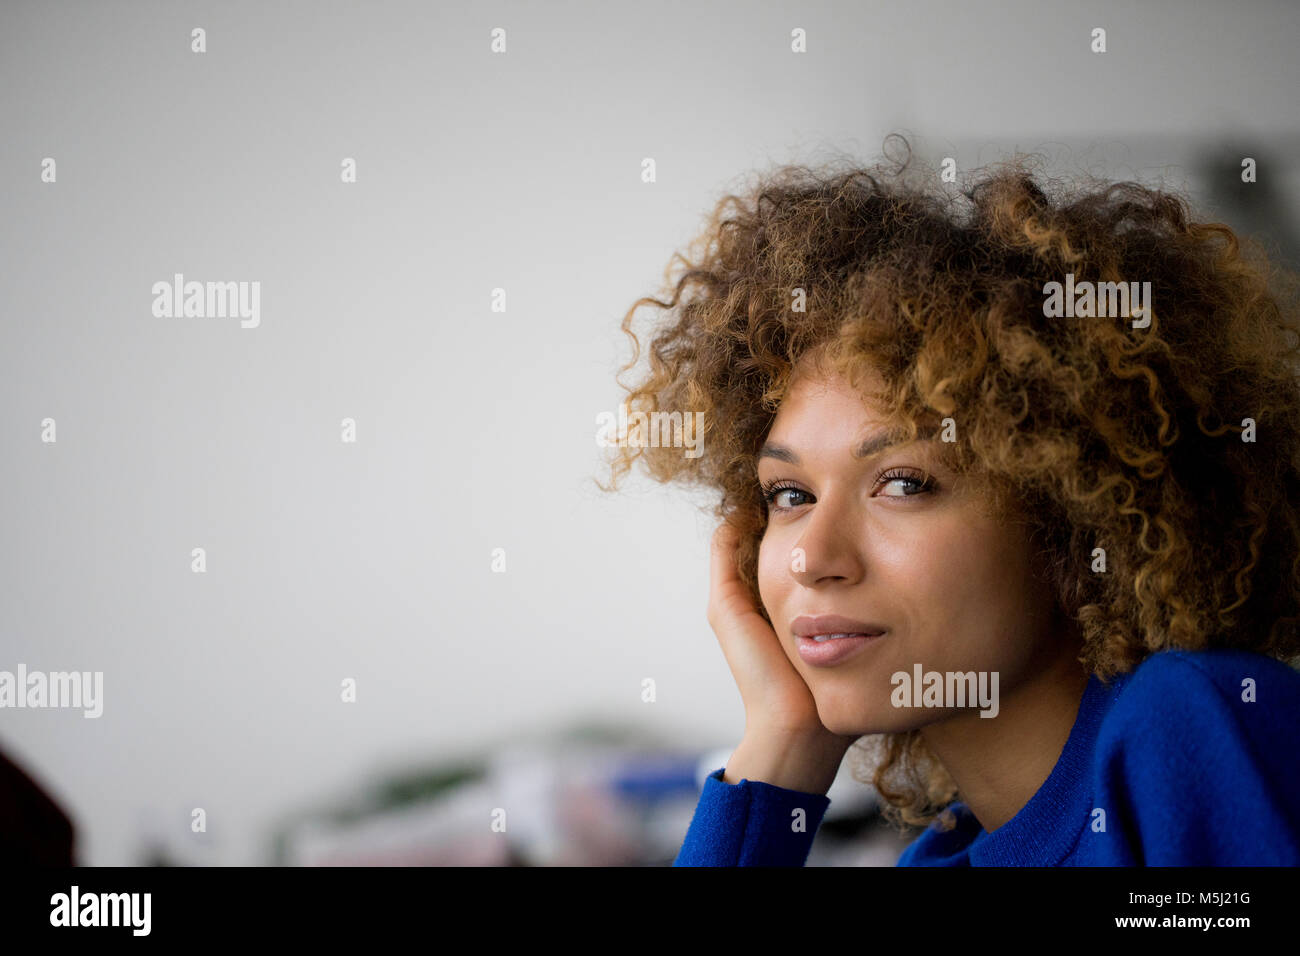 Portrait of smiling woman with hand on face Stock Photo